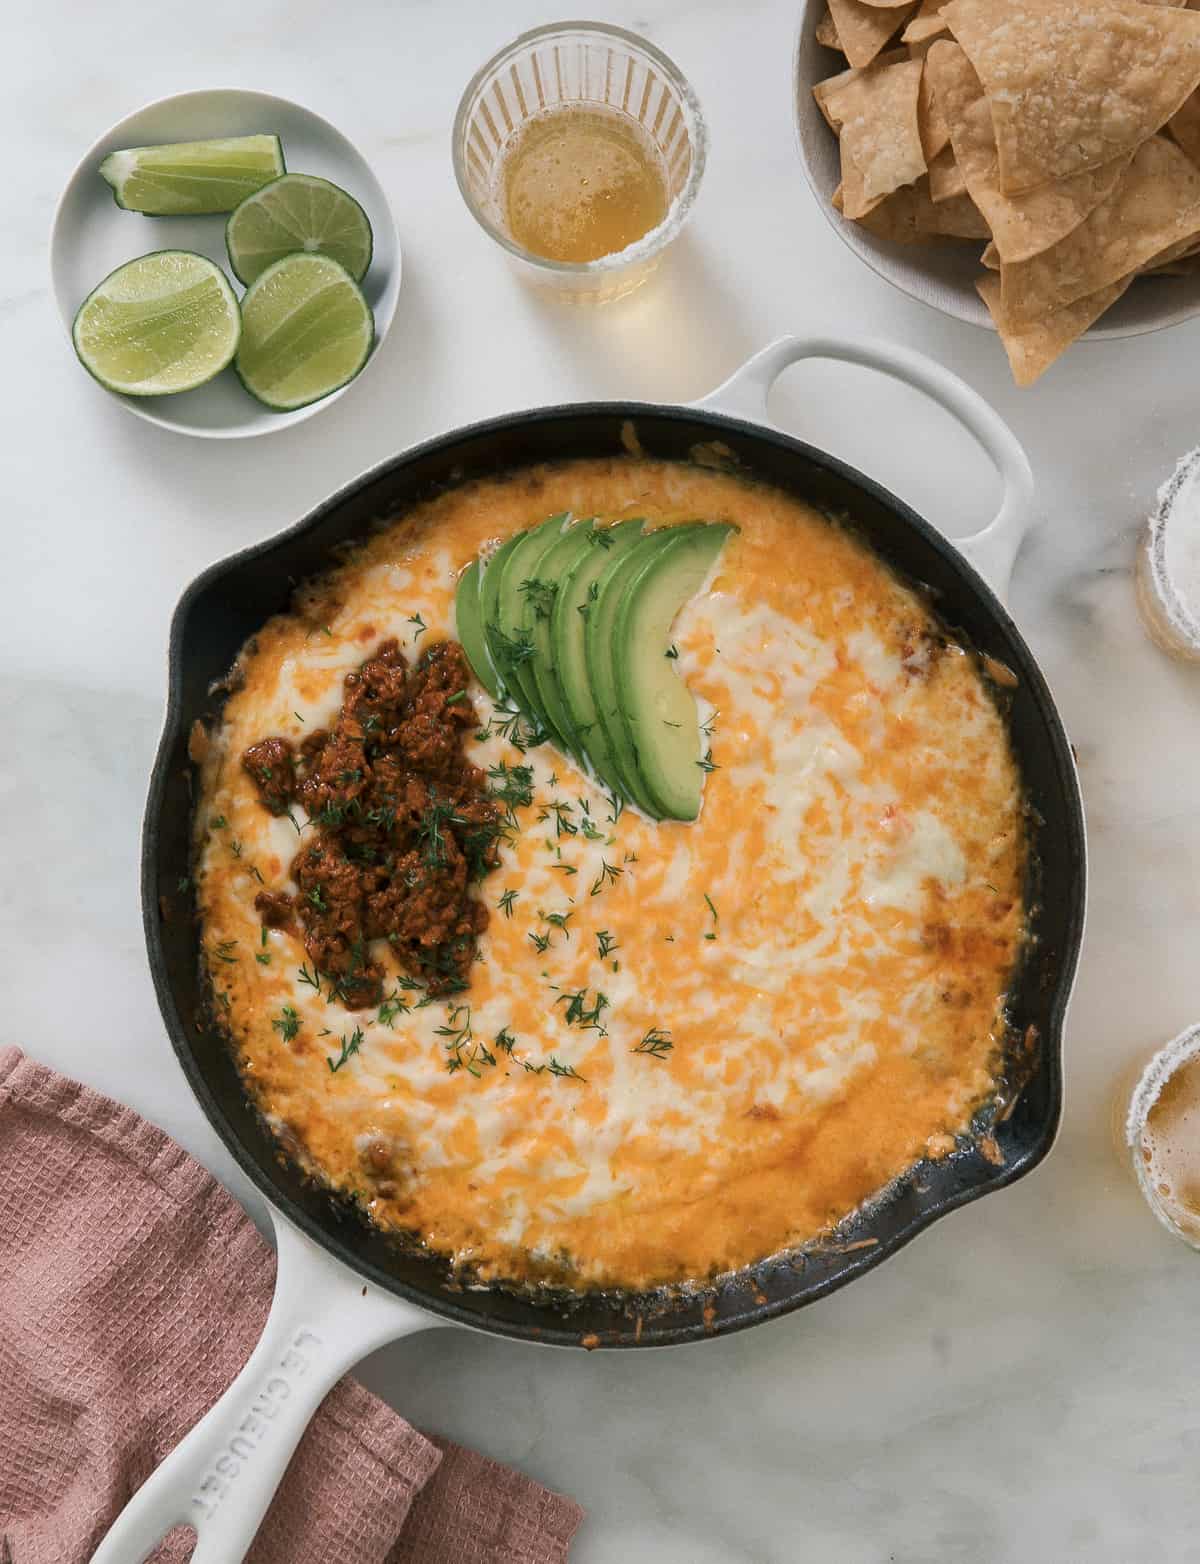 Skillet of queso fundido topped with chorizo and avocado.